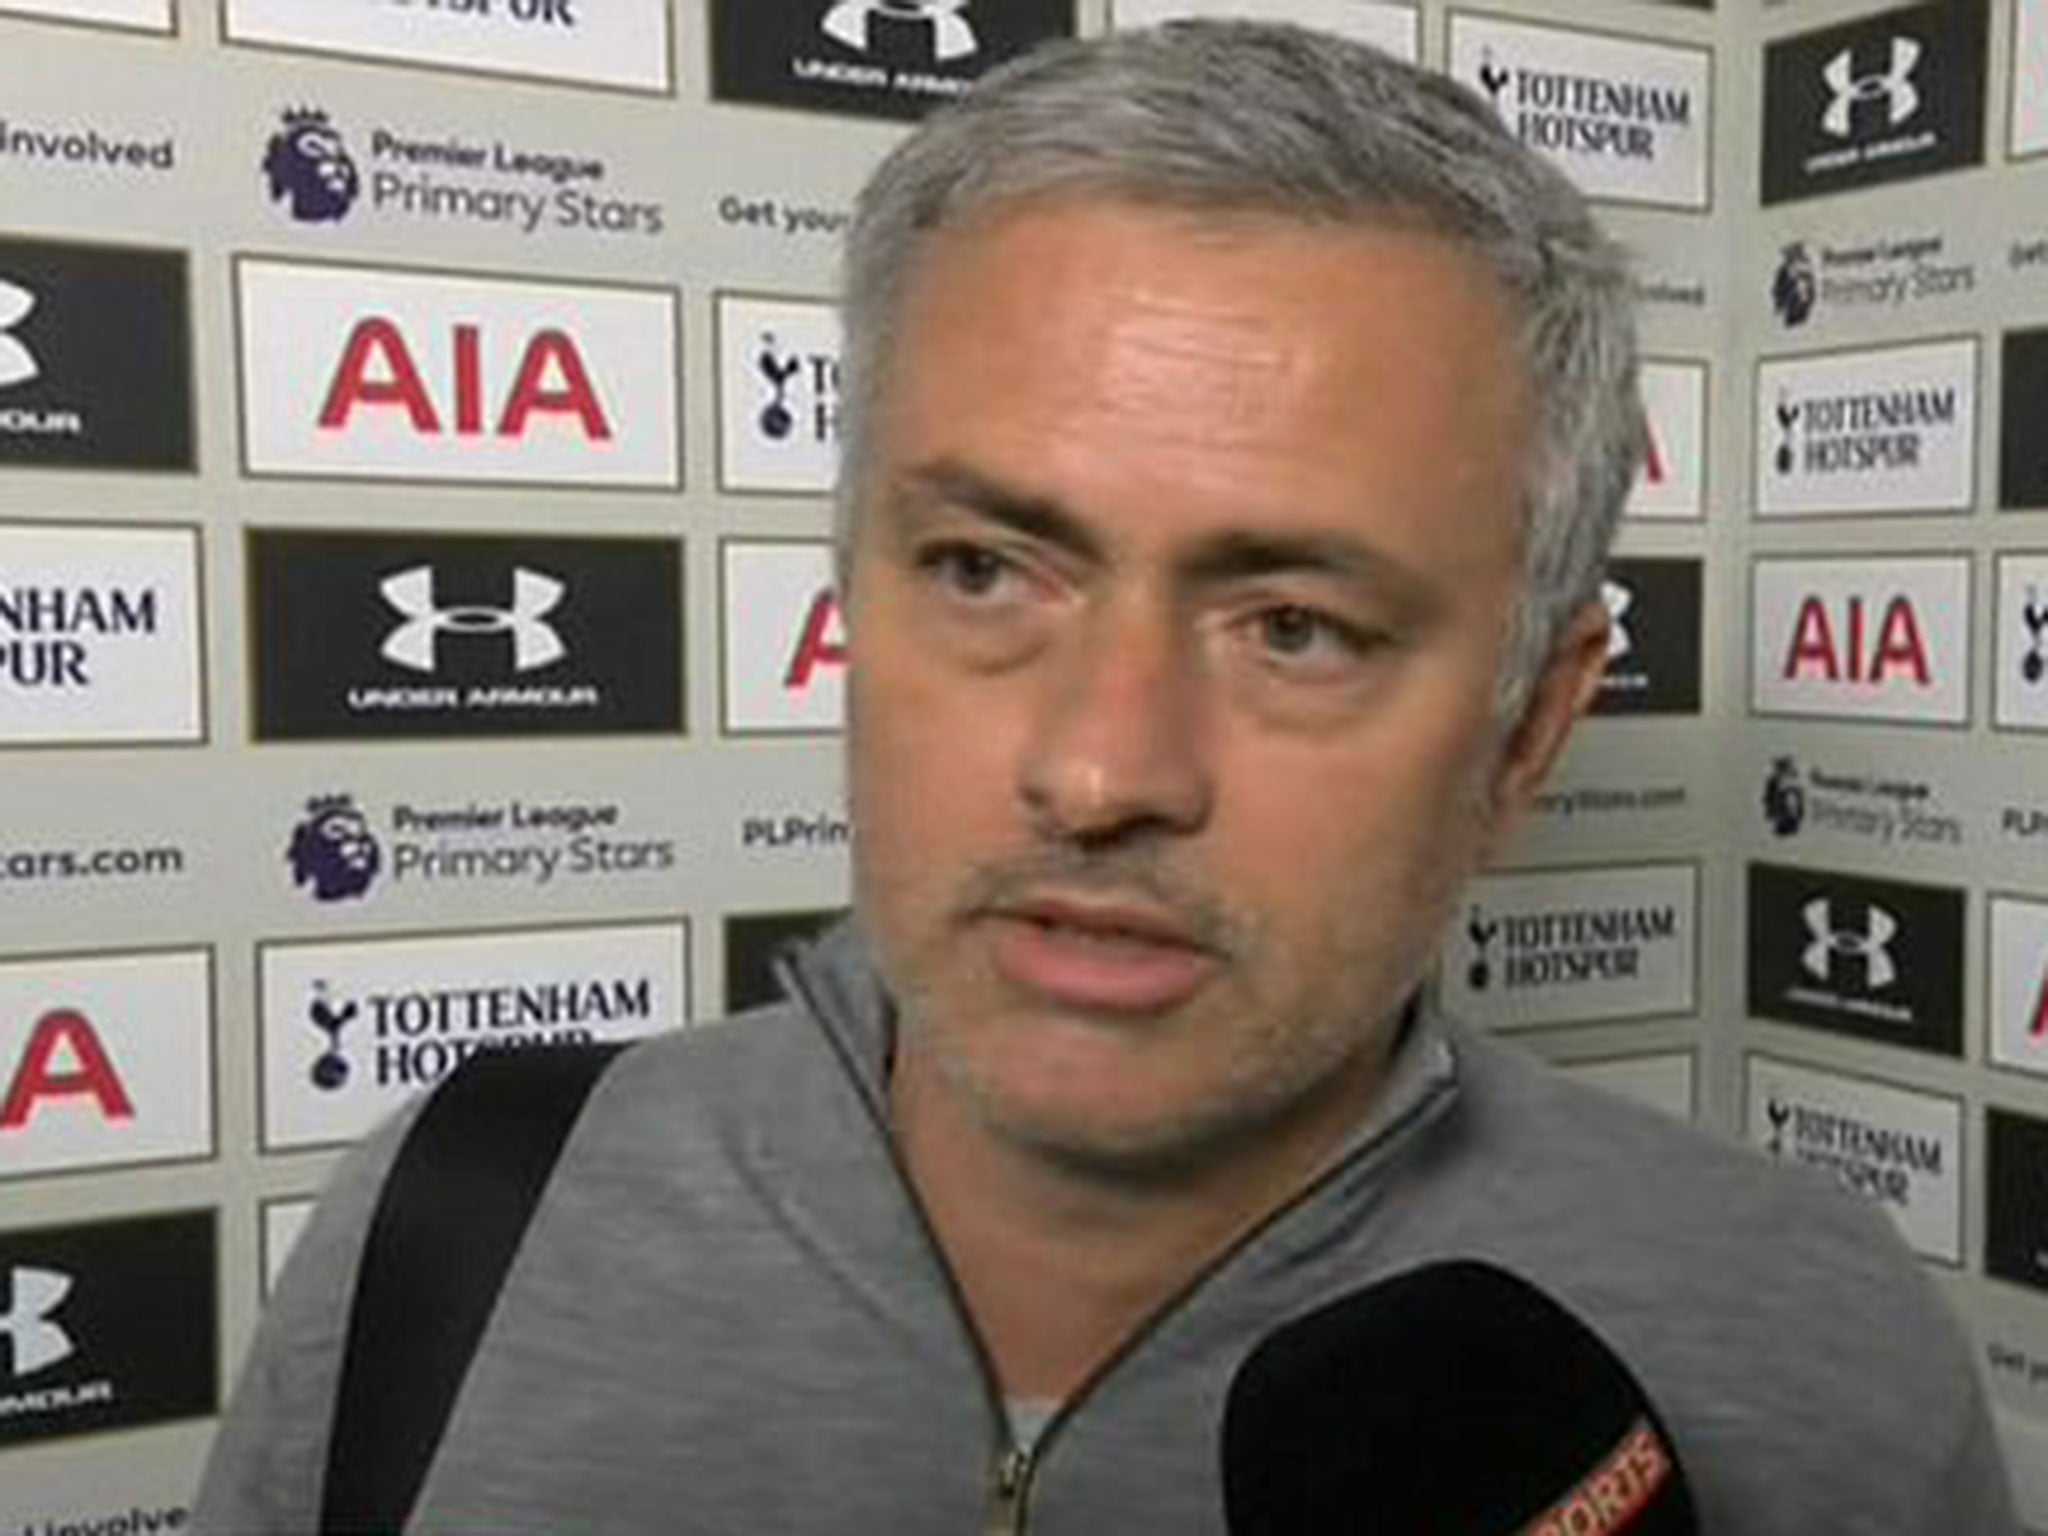 Jose Mourinho only answered three questions before walking out of his interview with Sky Sports